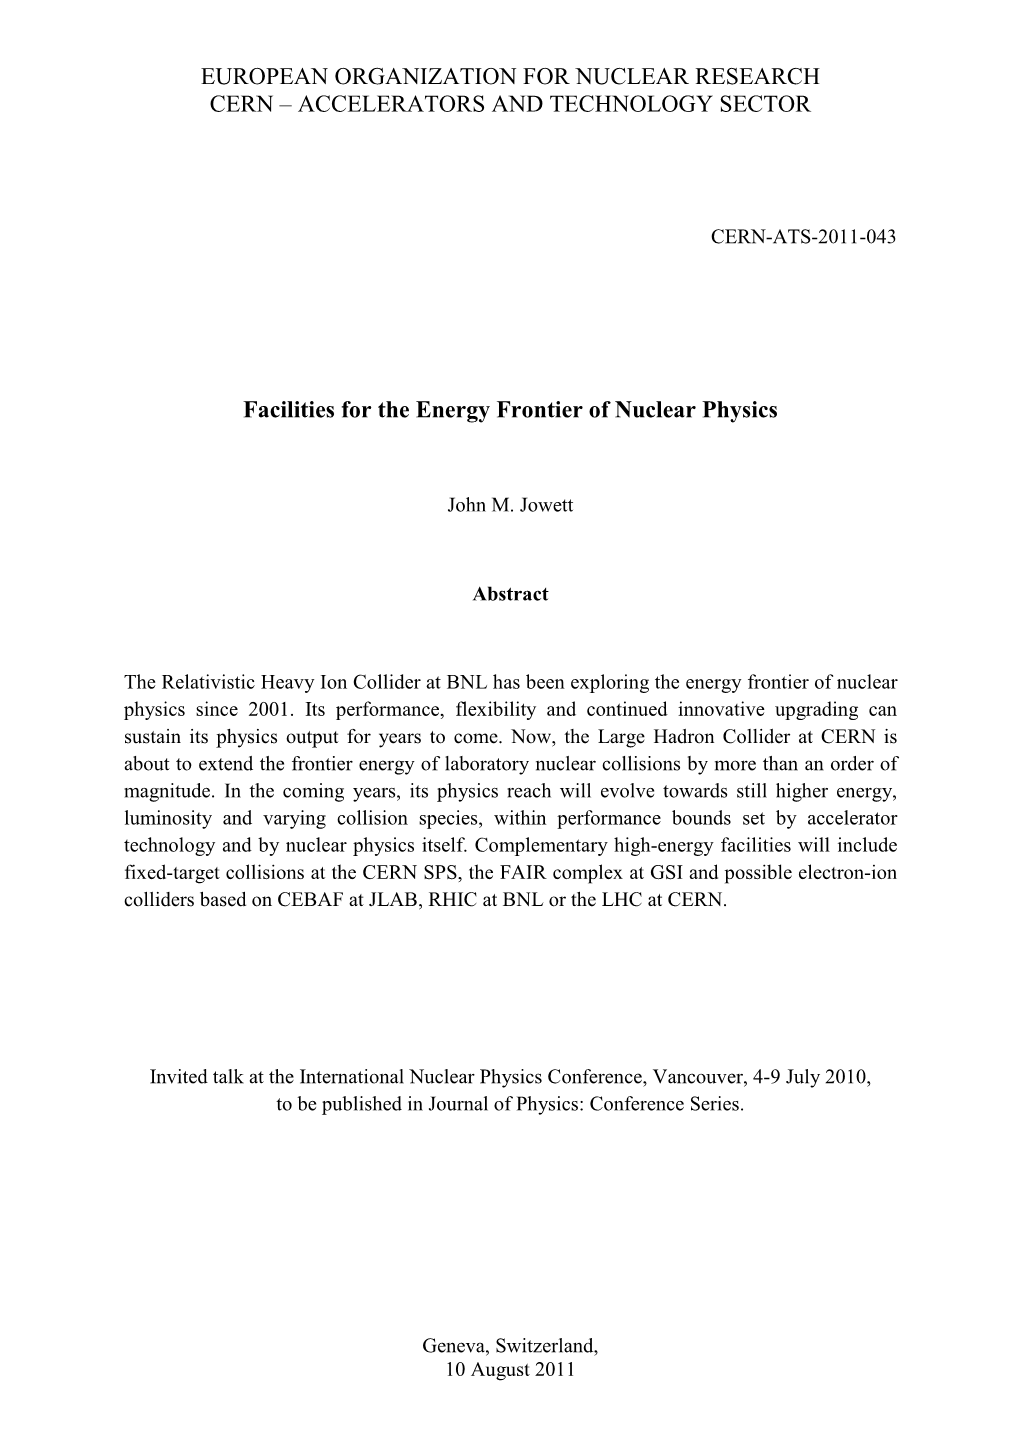 Facilities for the Energy Frontier of Nuclear Physics